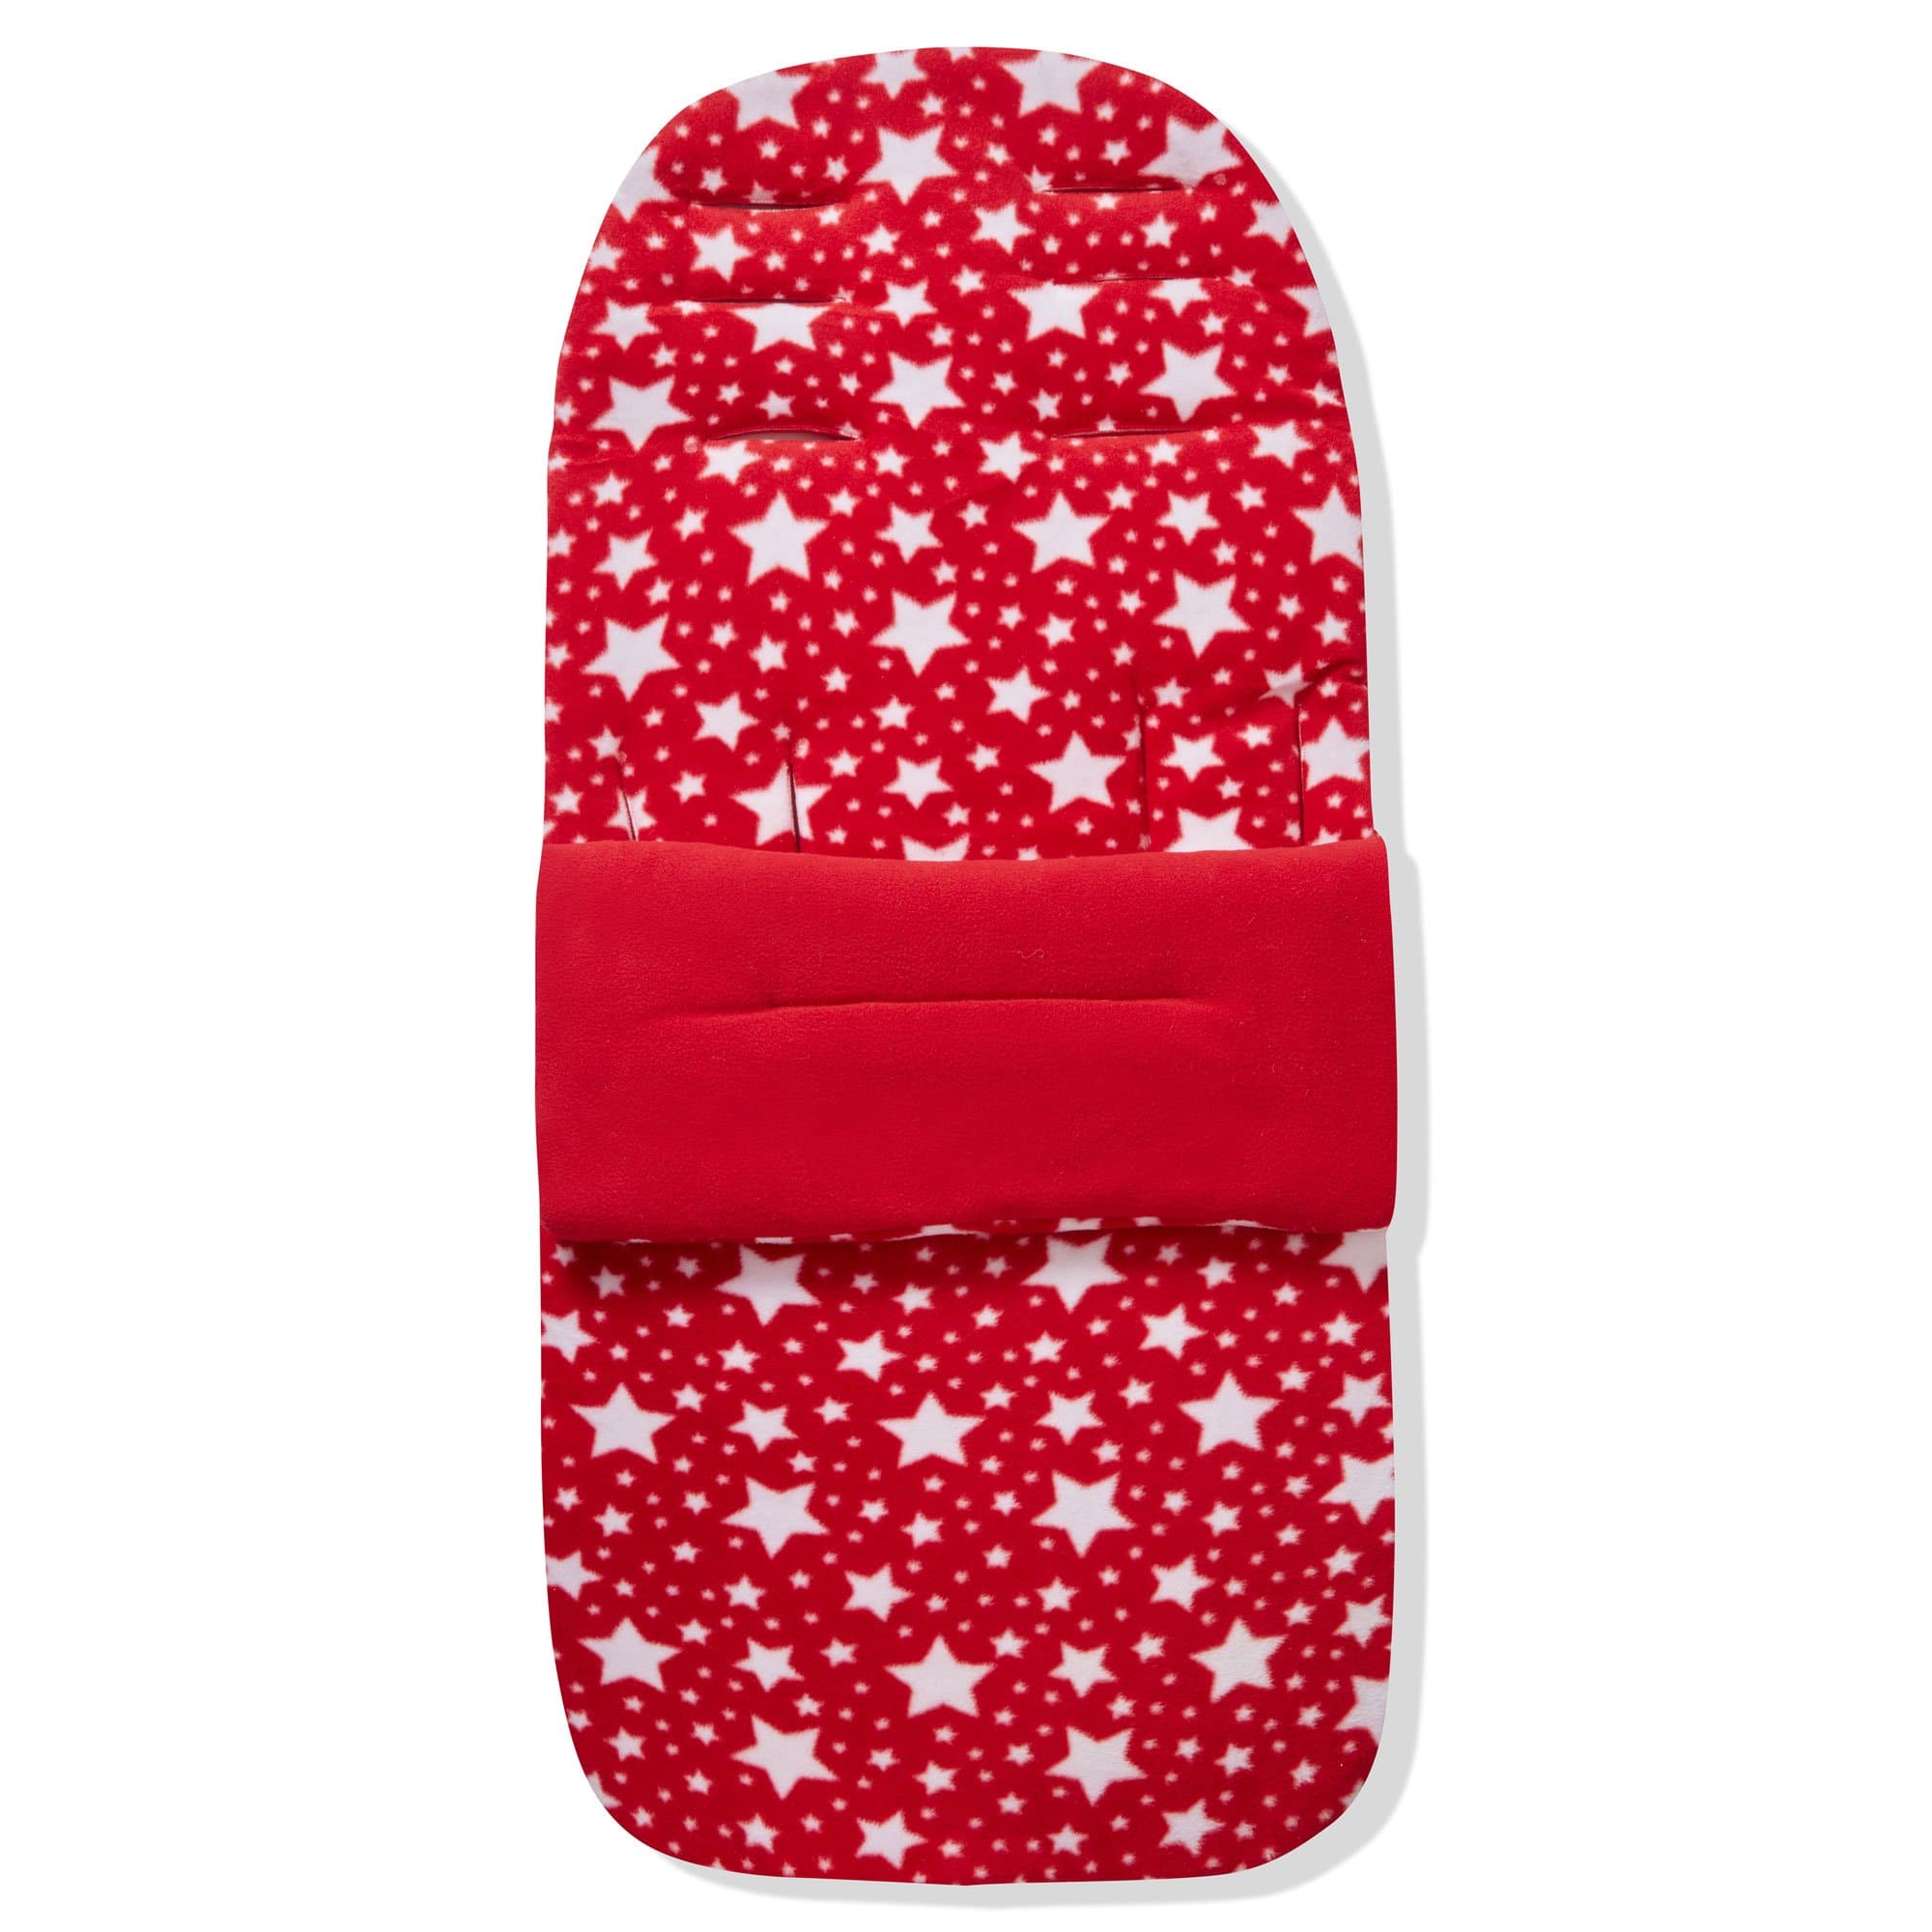 Fleece Footmuff / Cosy Toes Compatible with Recaro - Red Star / Fits All Models | For Your Little One